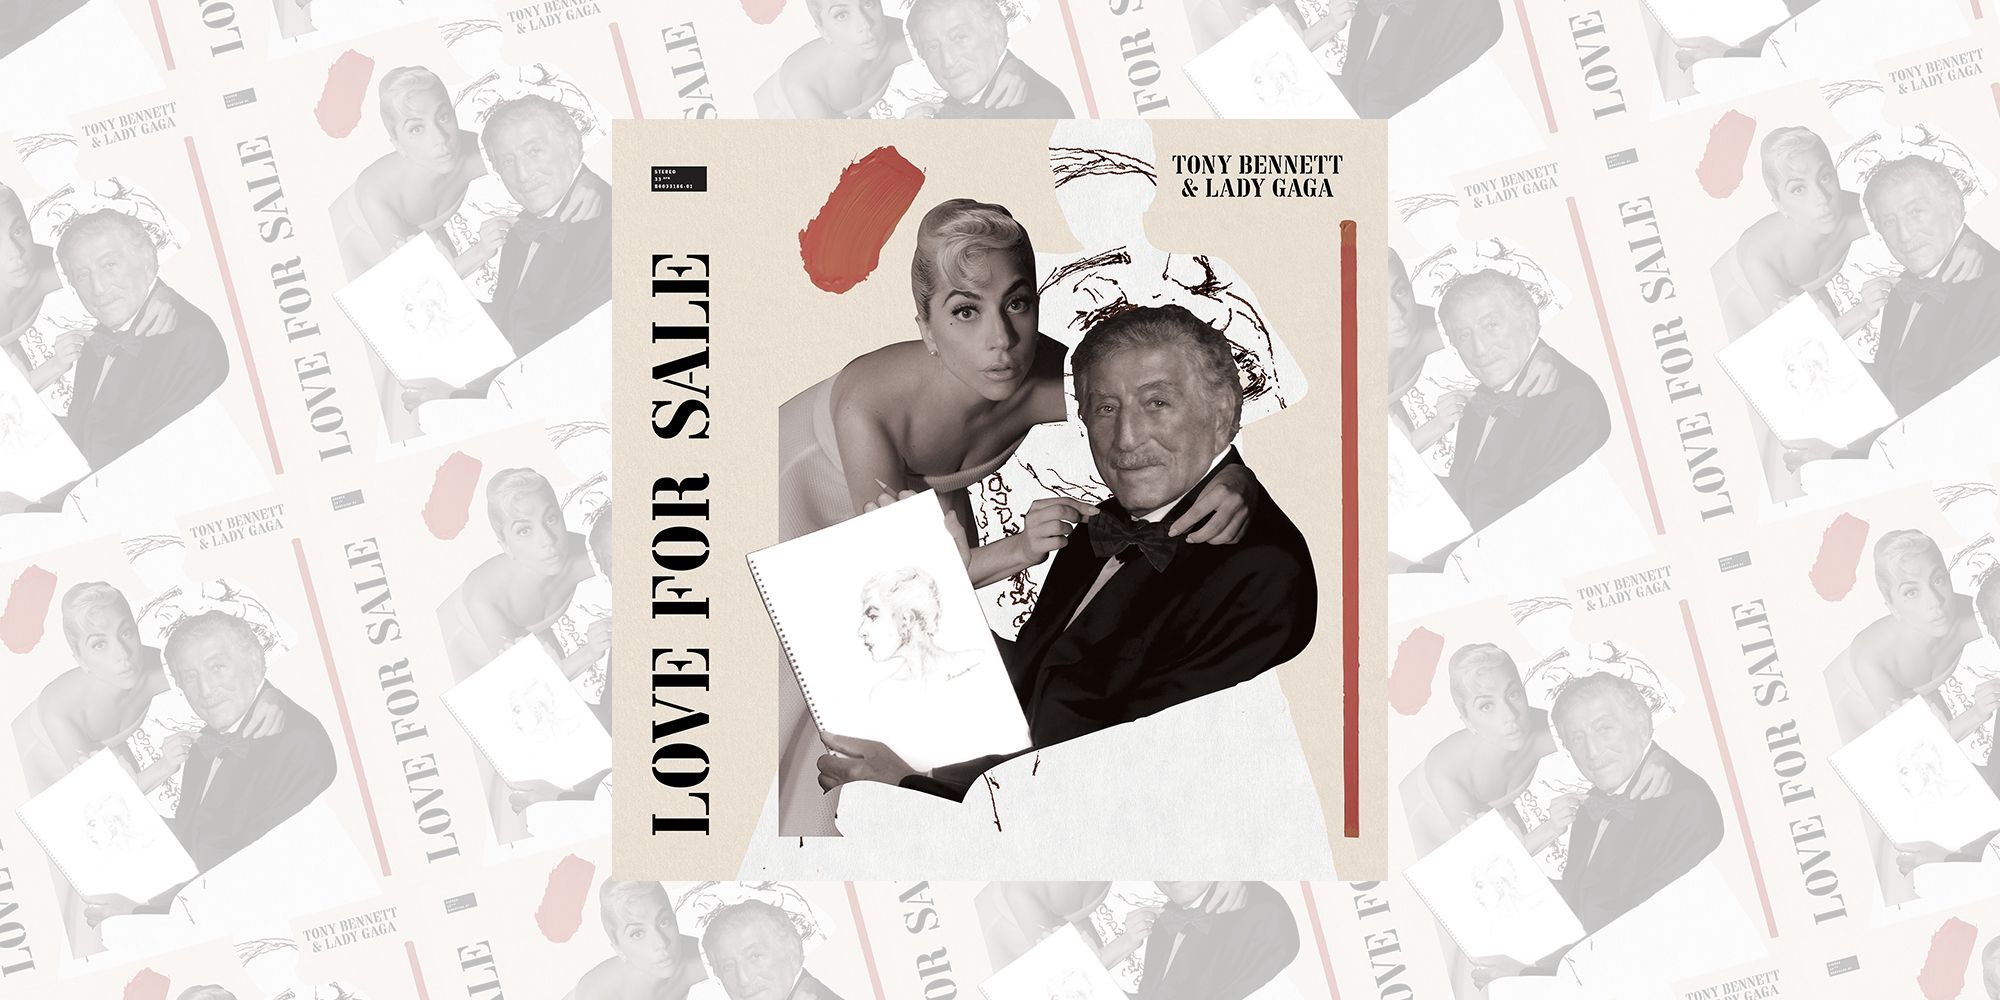 Set of 2 Lady Gaga Tony Bennett love for sale CD limited edition covers ...